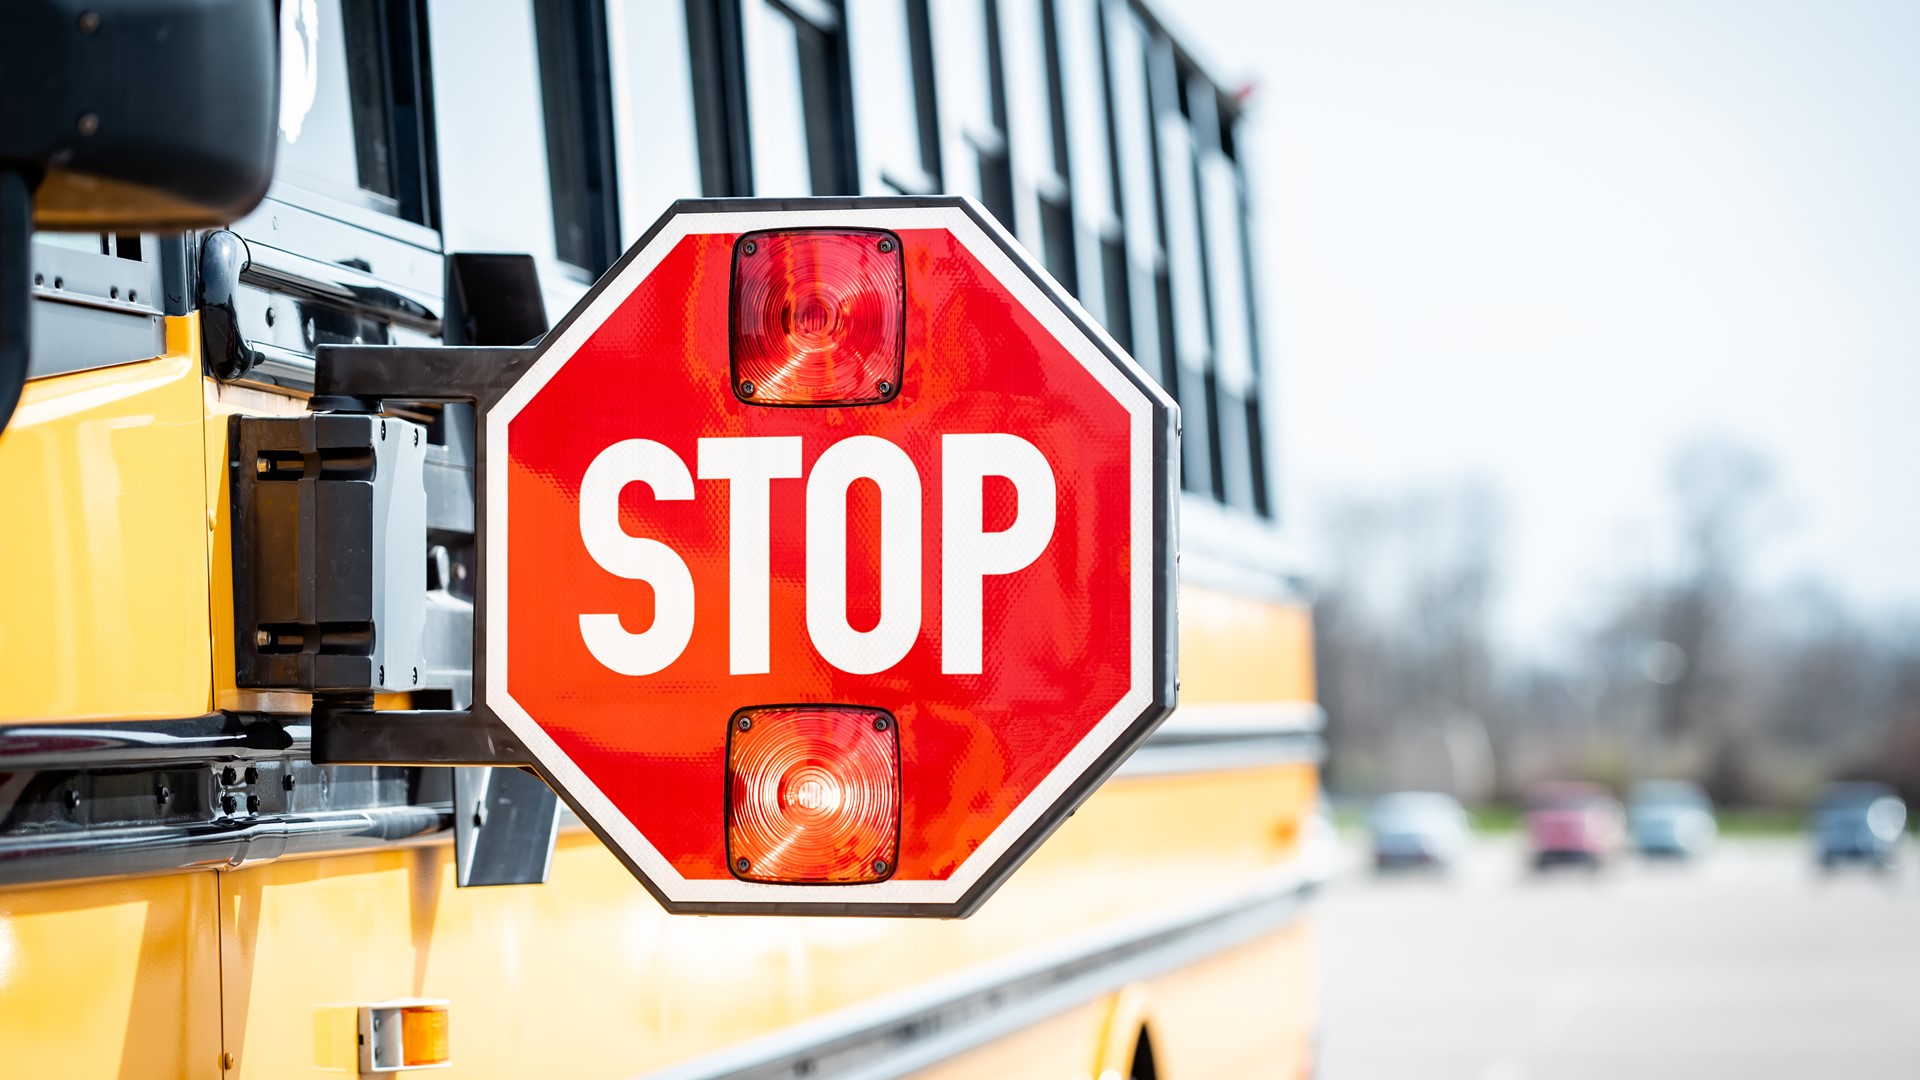 "Operation Safe Stop" is held annually by Pa. State Police, PennDOT, and school districts to stop drivers from ignoring stopped school buses.